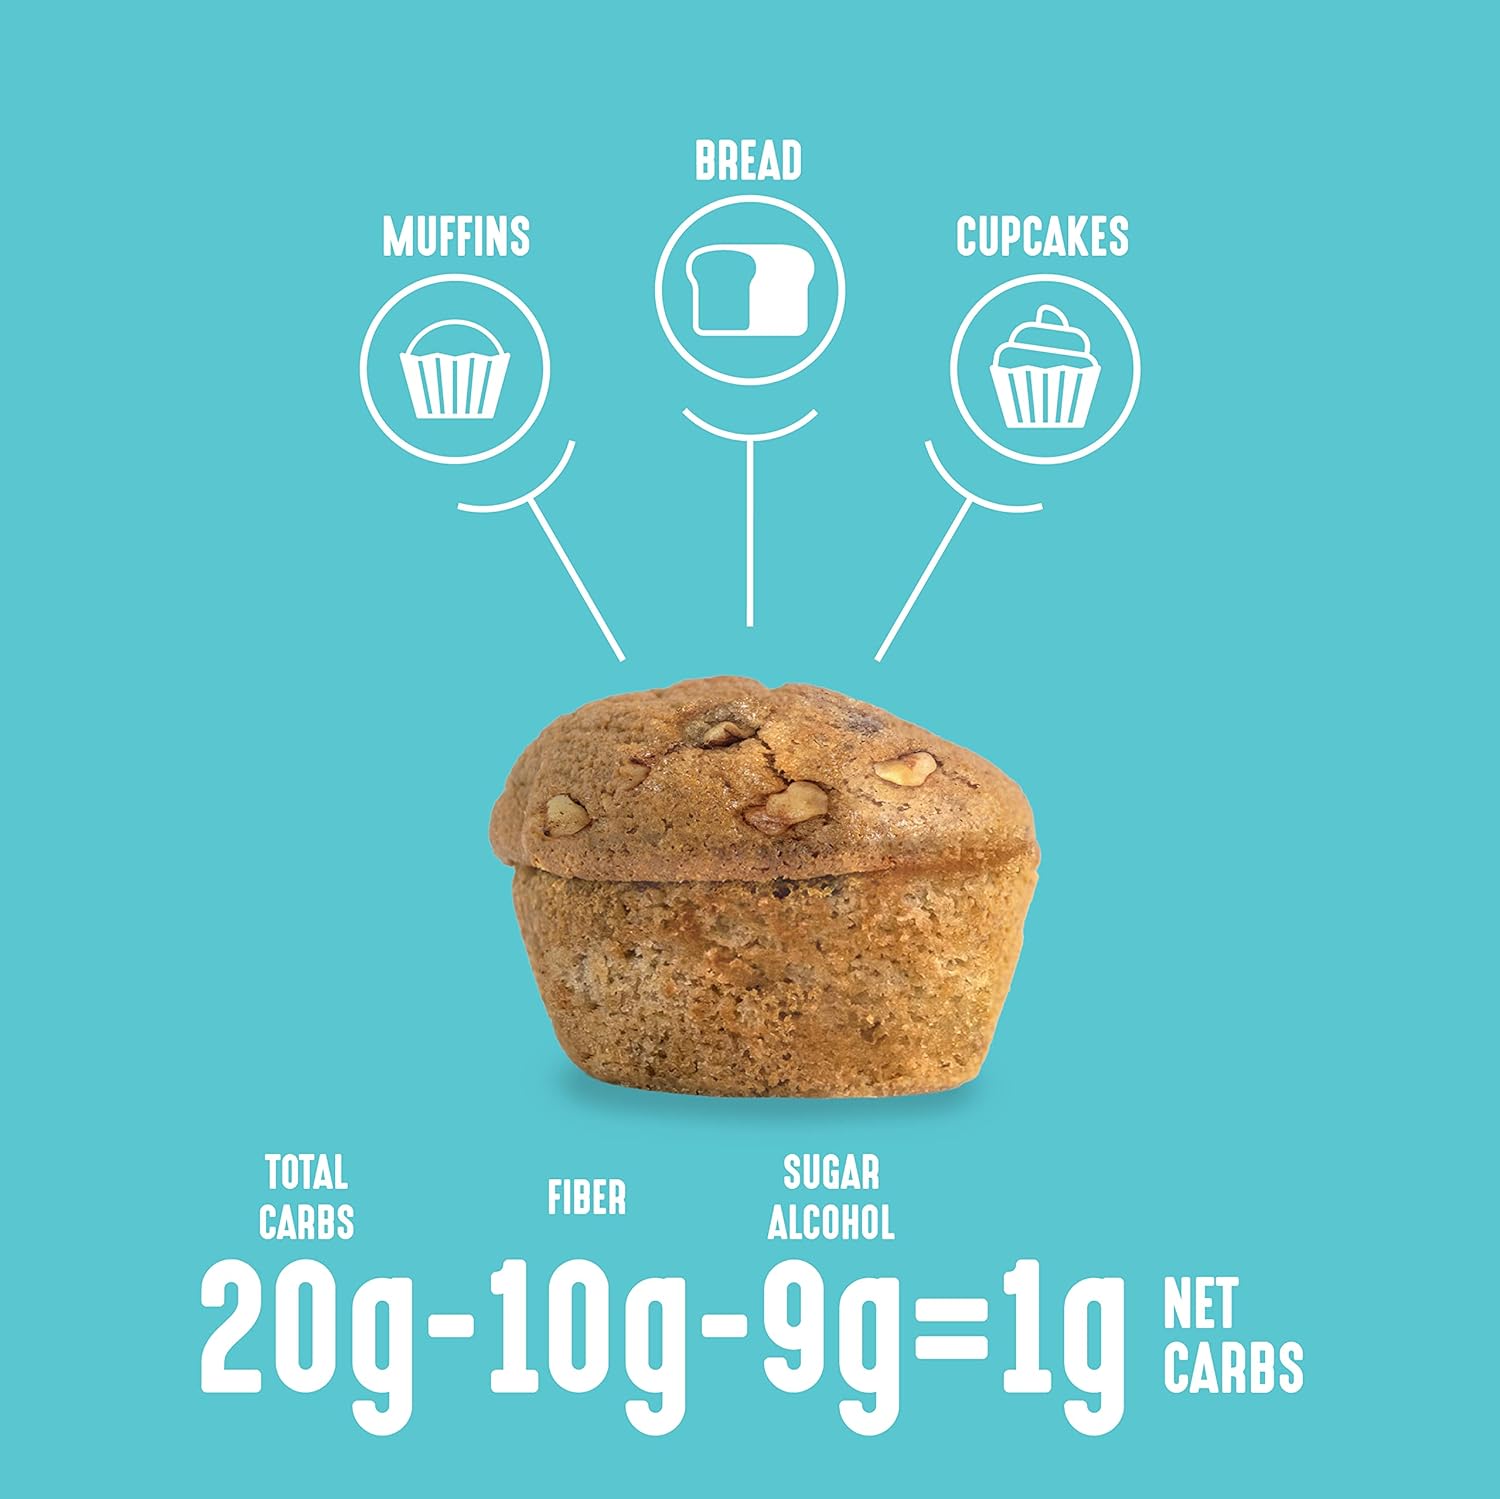 Lakanto Sugar Free Banana Nut Muffin and Bread Mix - Sweetened with Monk Fruit Sweetener, 2g Net Carbs, Gluten Free, Naturally Flavored, Keto Diet Friendly, Dairy Free (12 Muffins) : Grocery & Gourmet Food